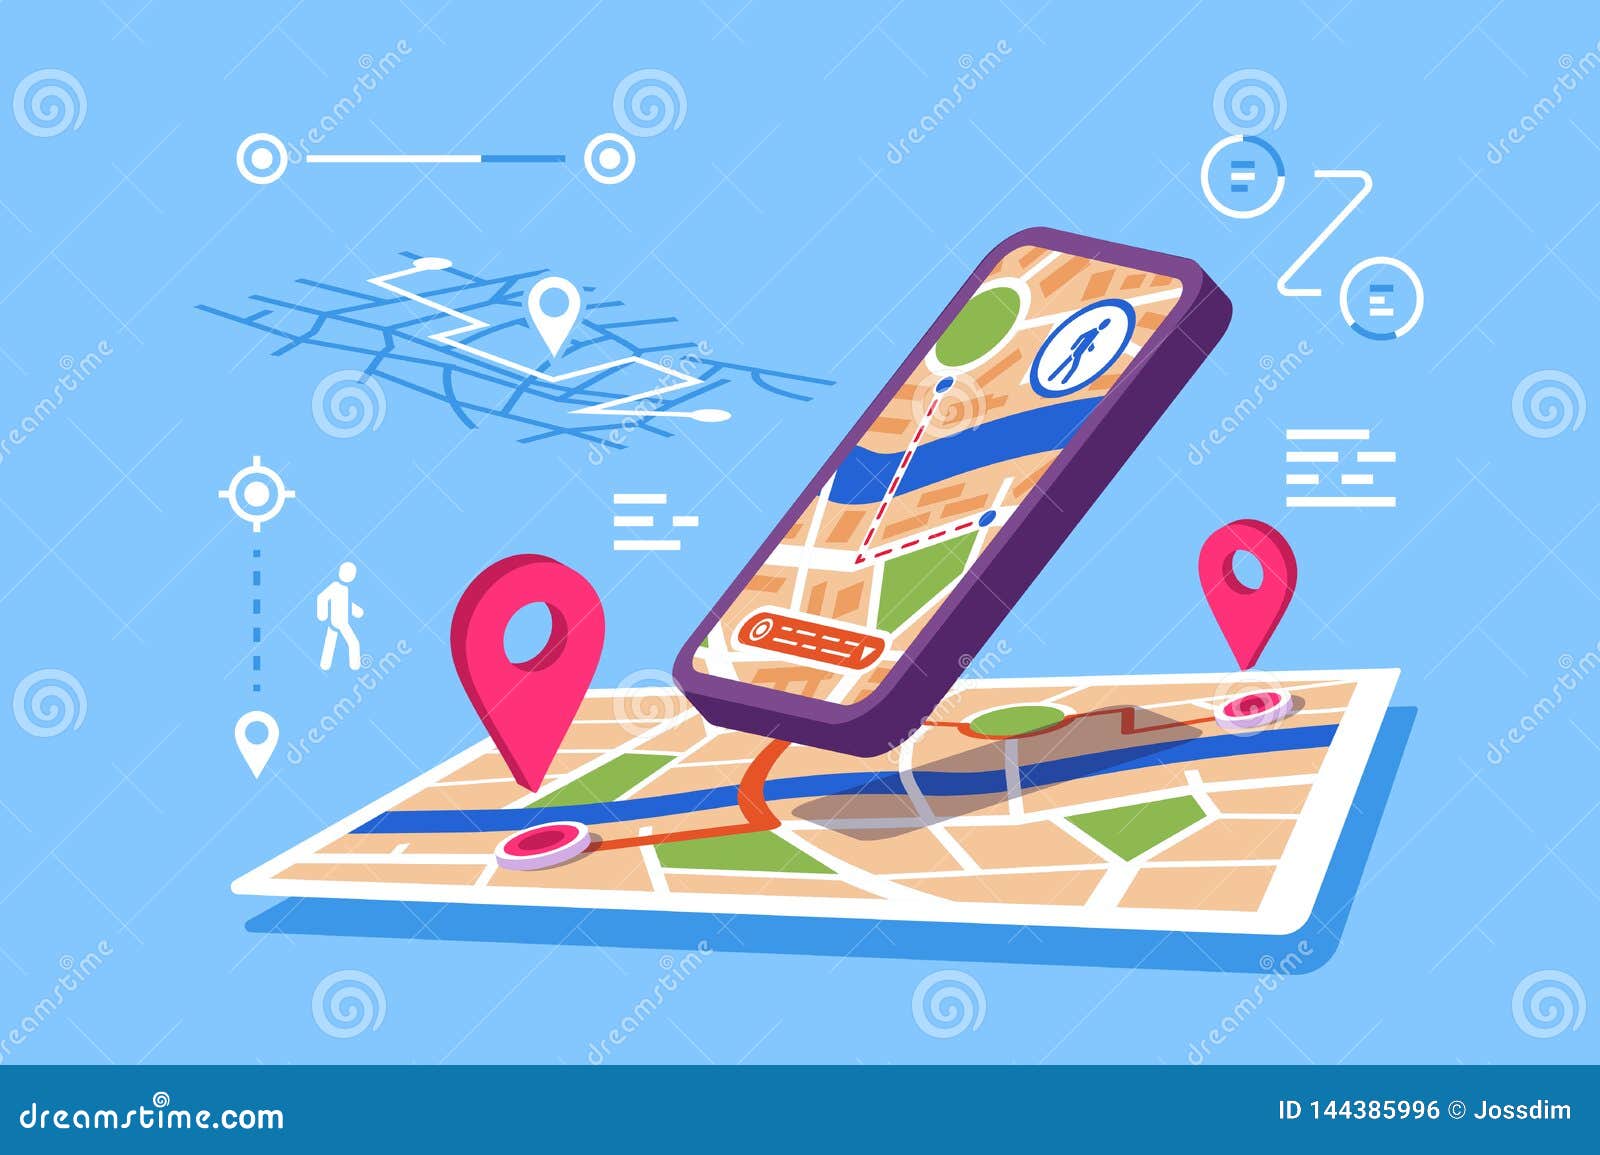 location maps online application